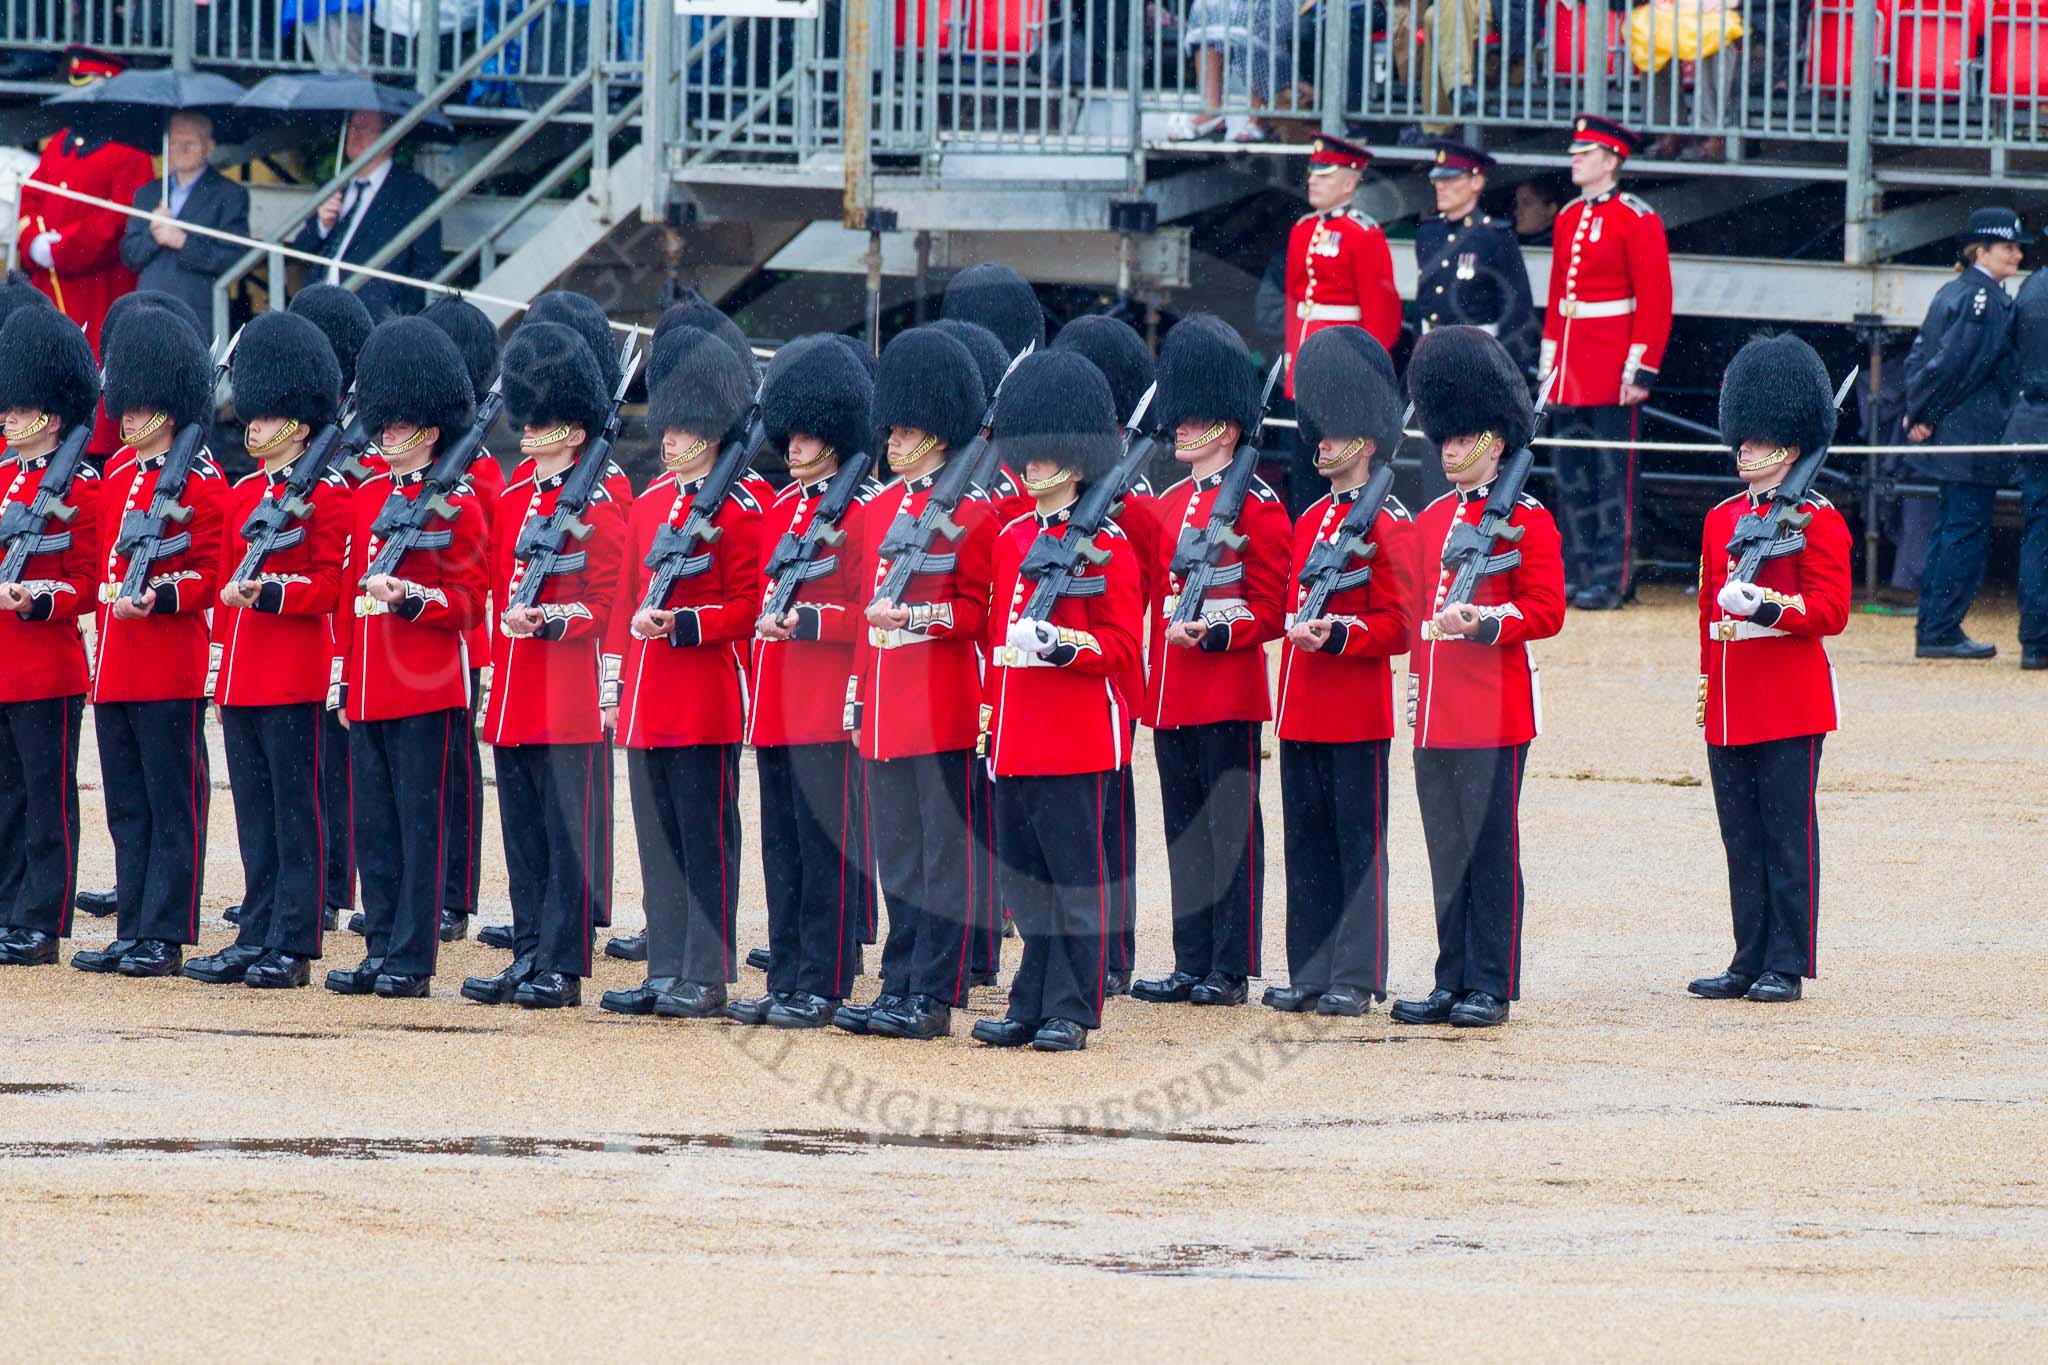 The Colonel's Review 2014.
Horse Guards Parade, Westminster,
London,

United Kingdom,
on 07 June 2014 at 11:28, image #453